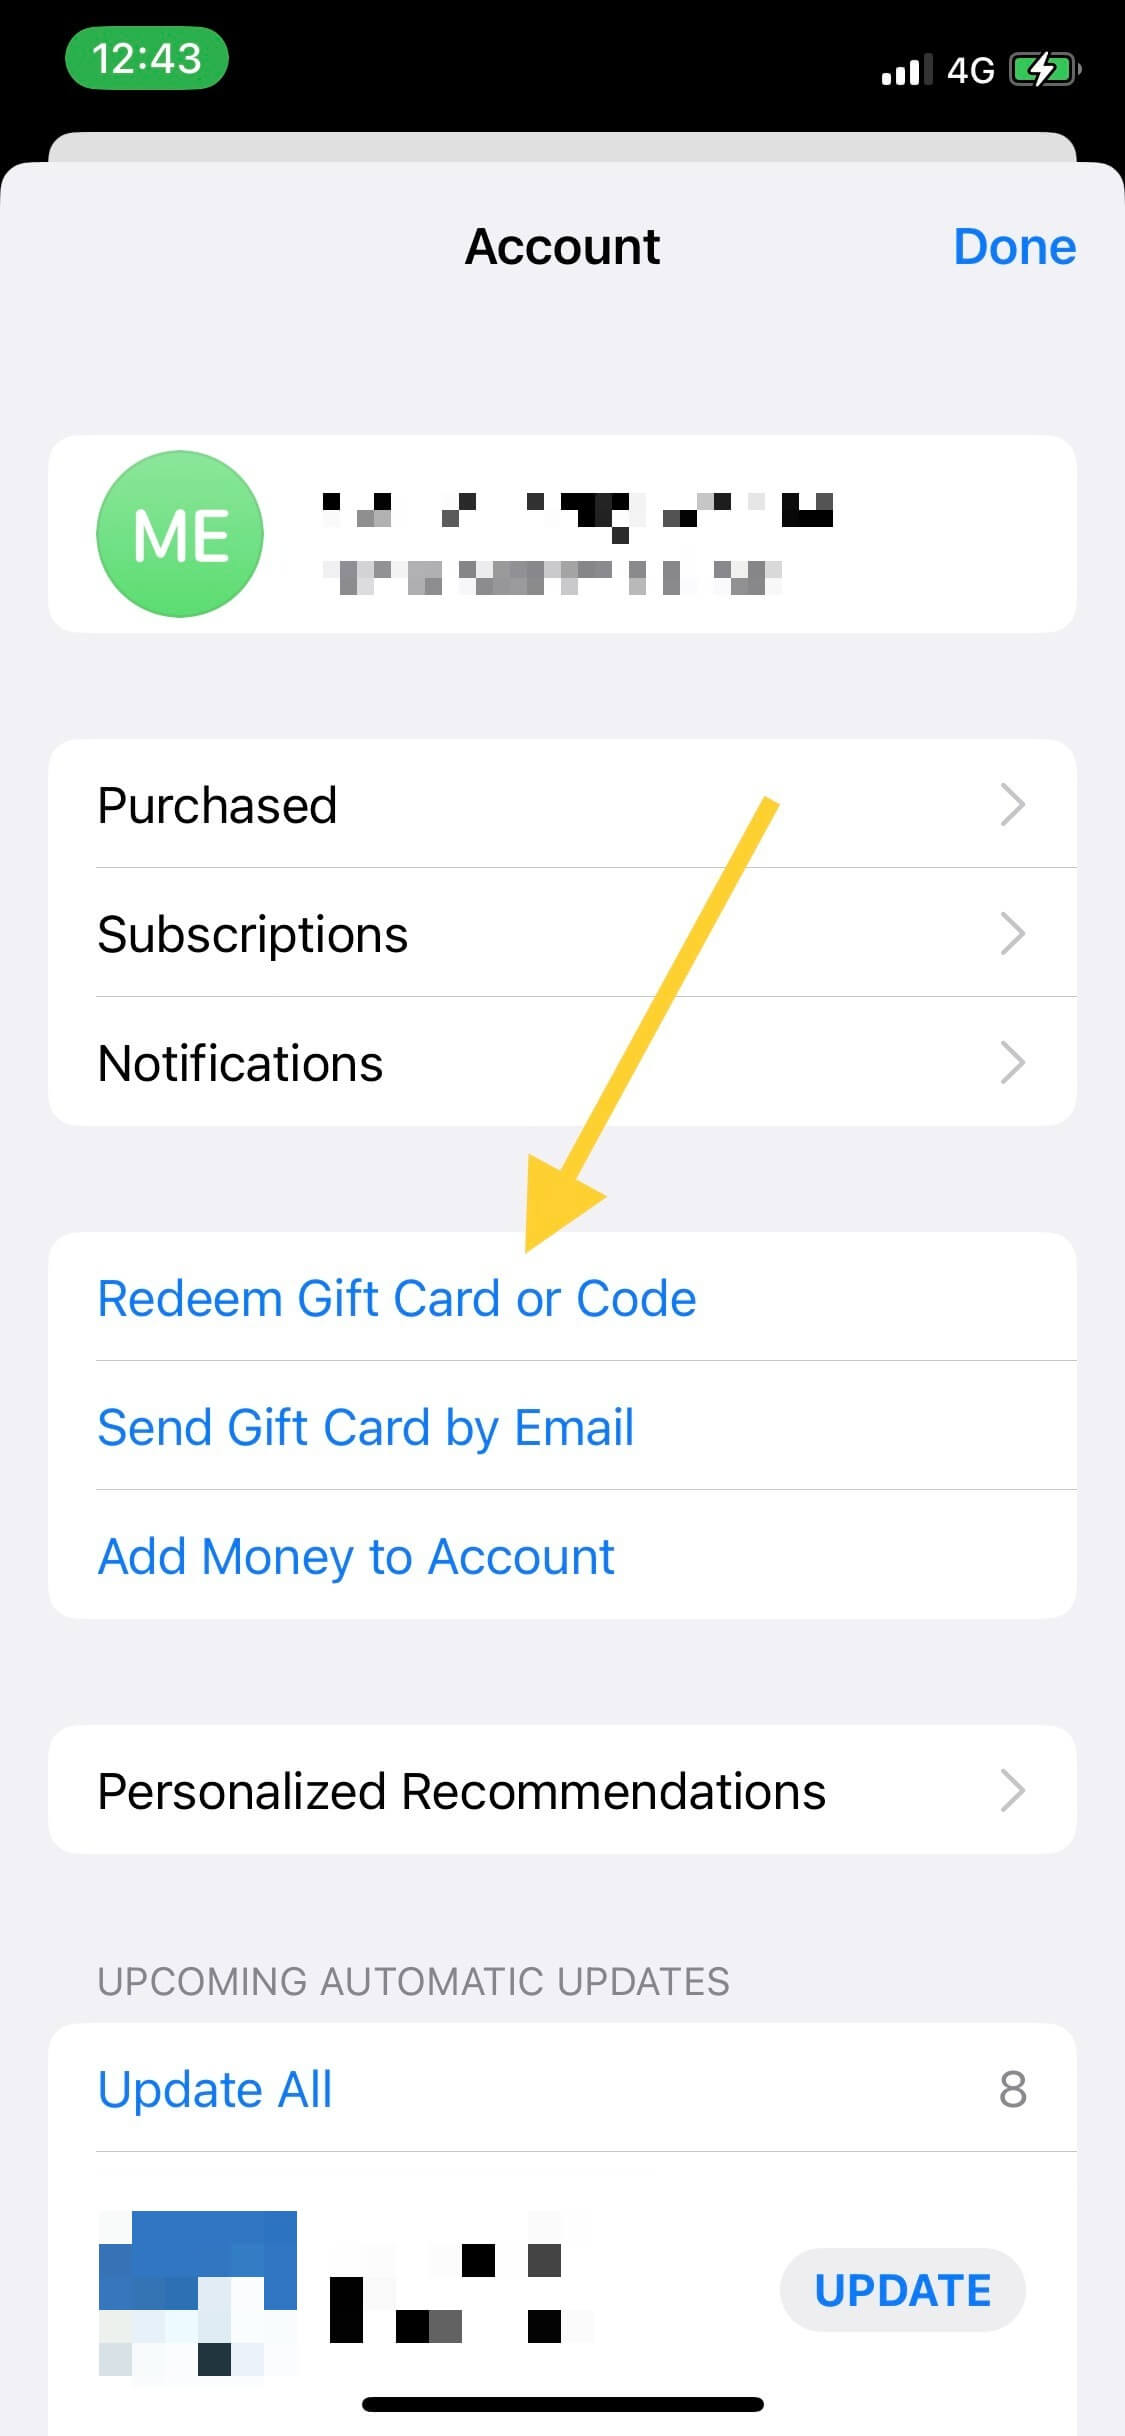 Scroll down to the Redeem Gift Card or Code section and tap on it